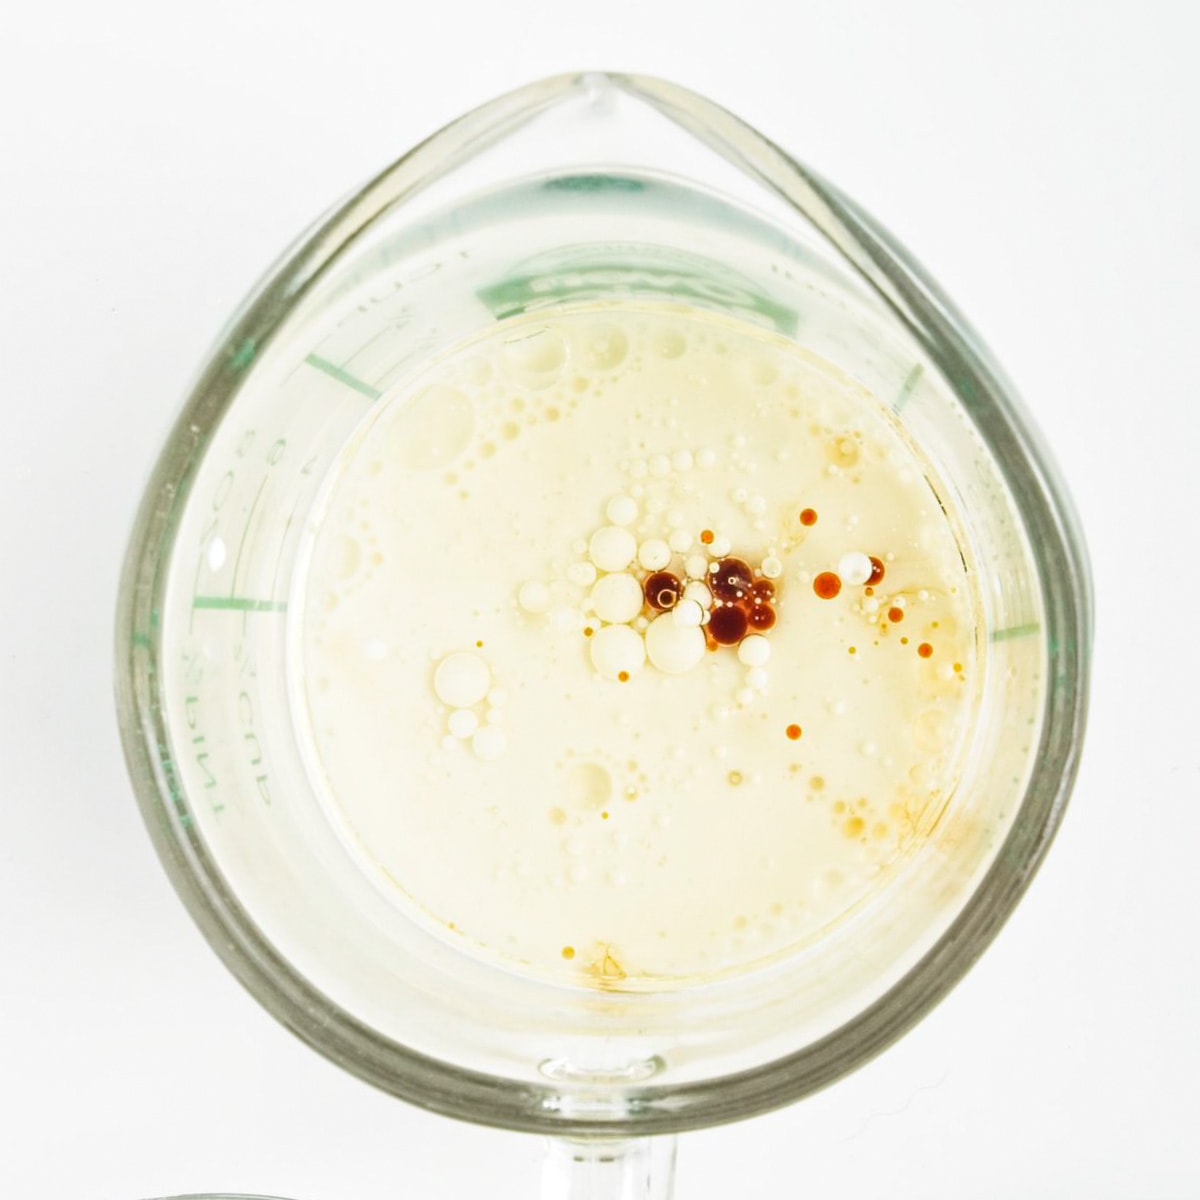 Wet ingredients in a glass measuring cup.